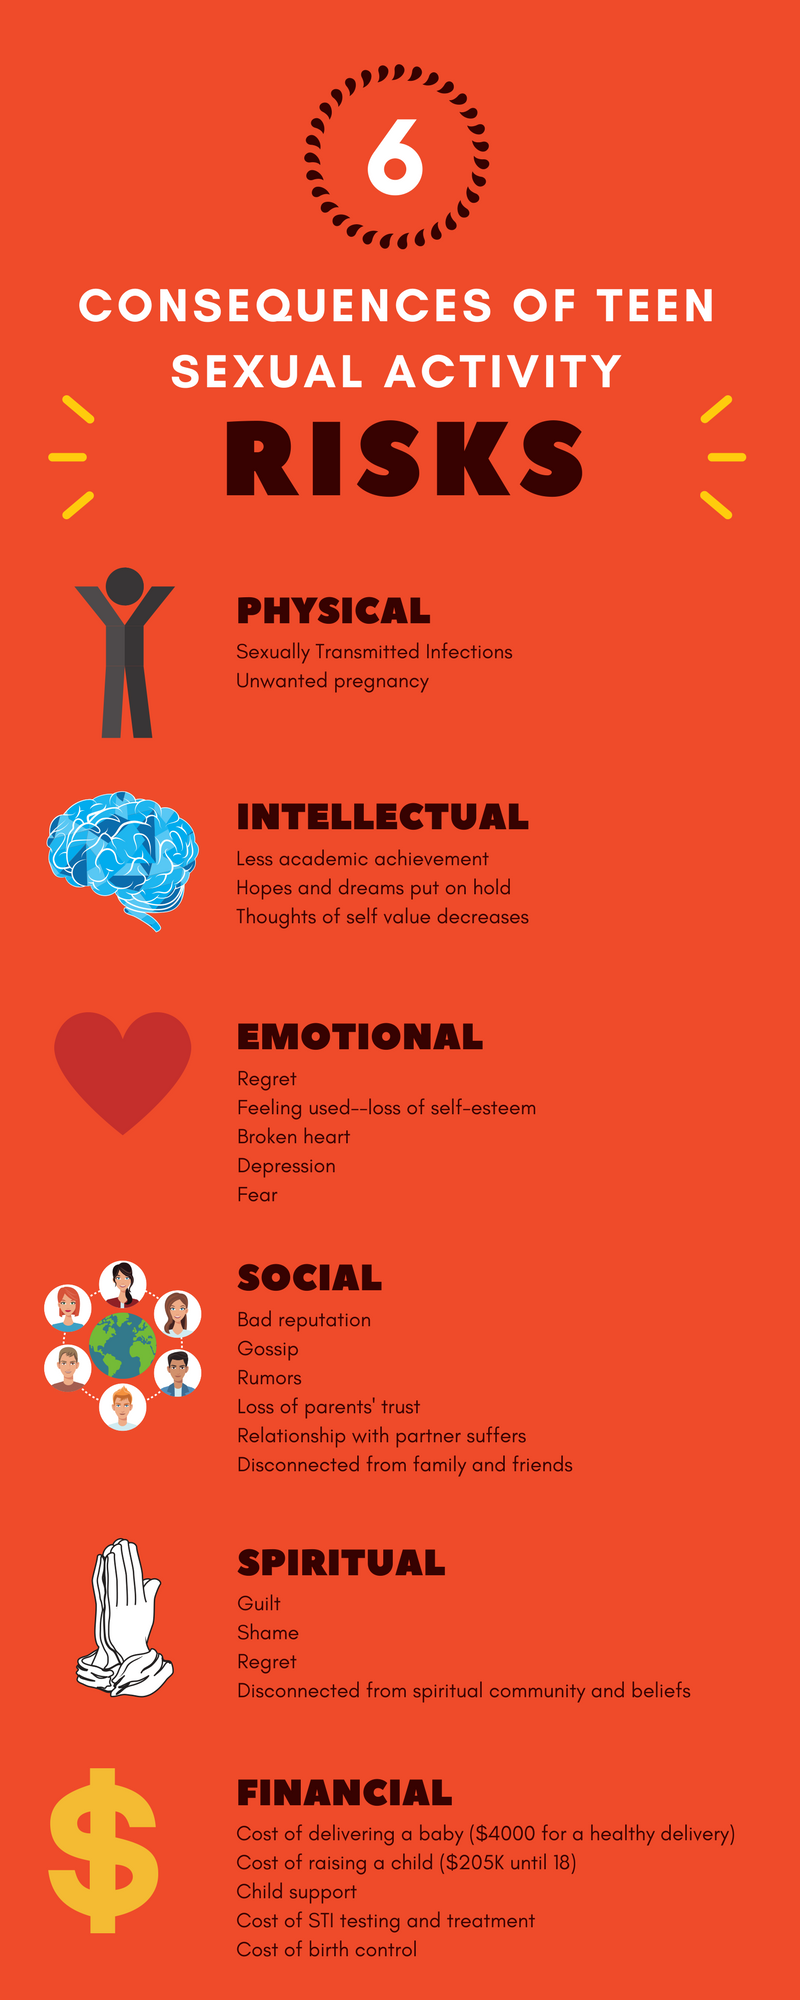 Graphic that lists the physical, intellectual, emotional, social, spiritual and financial consequences of teen sex